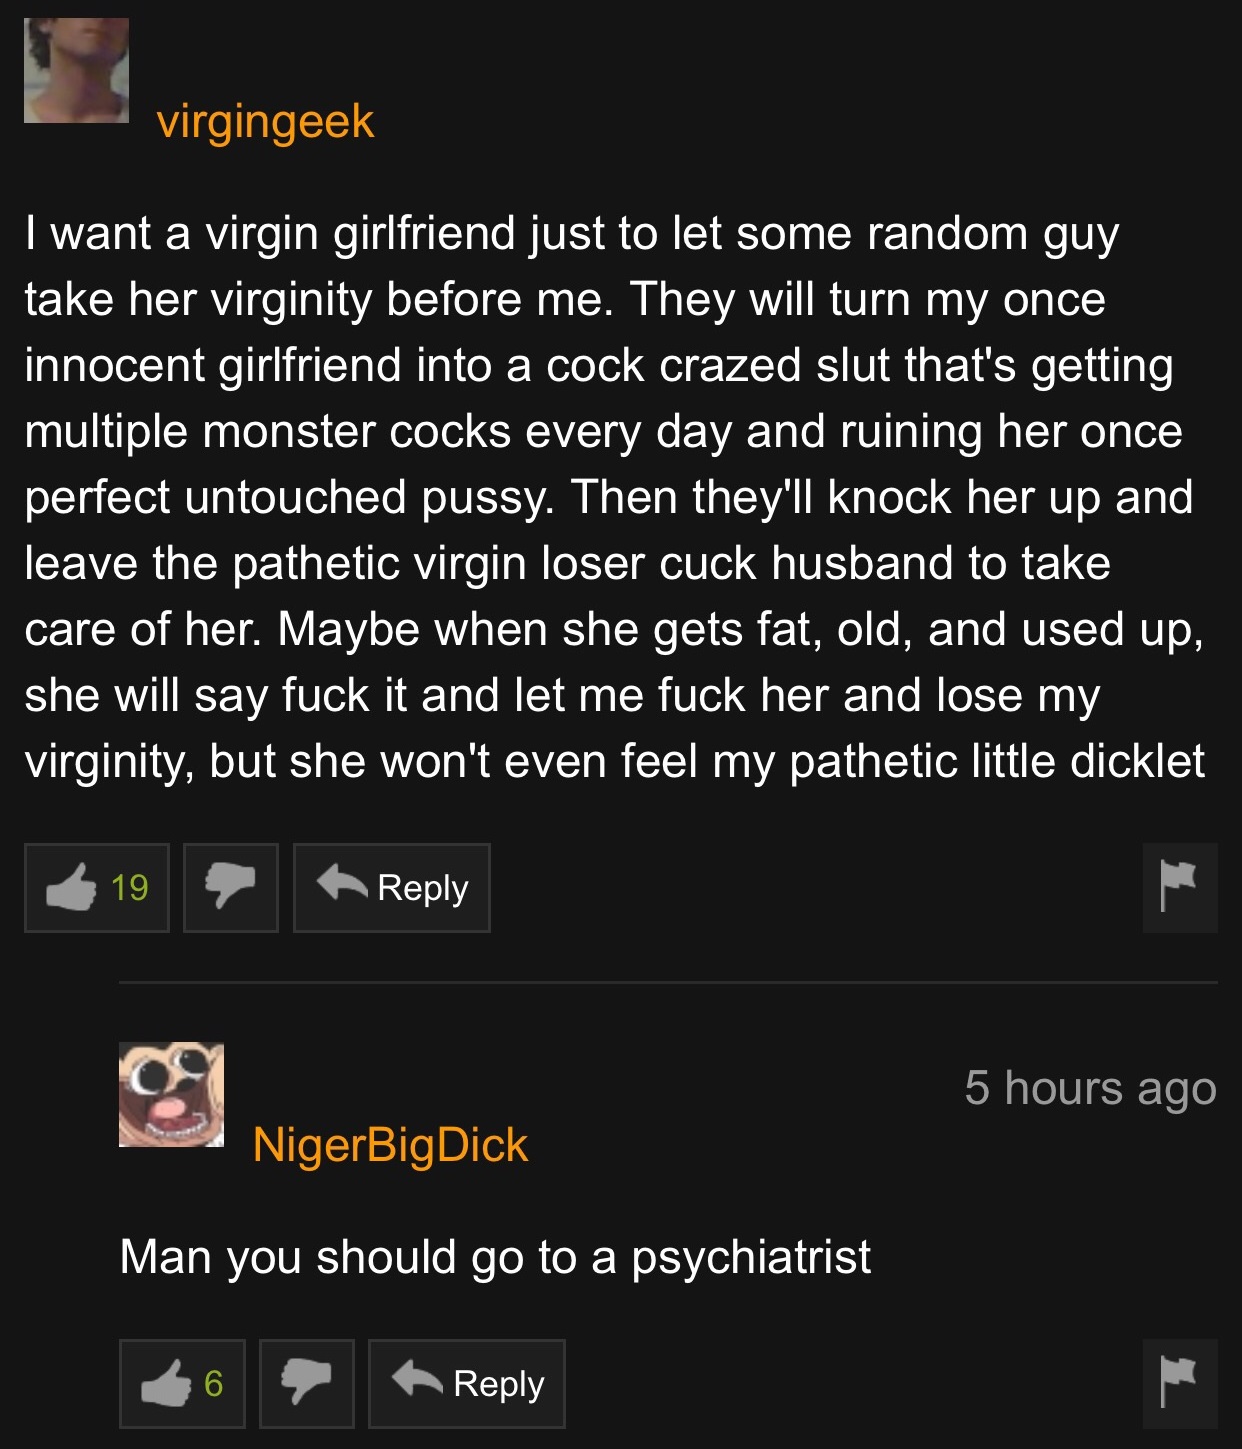 Virgingeek I want a virgin girlfriend just to let some random guy take her virginity before me. They will turn my once innocent girlfriend into a cock crazed slut that's getting multiple monster cocks every day and ruining her once perfect un